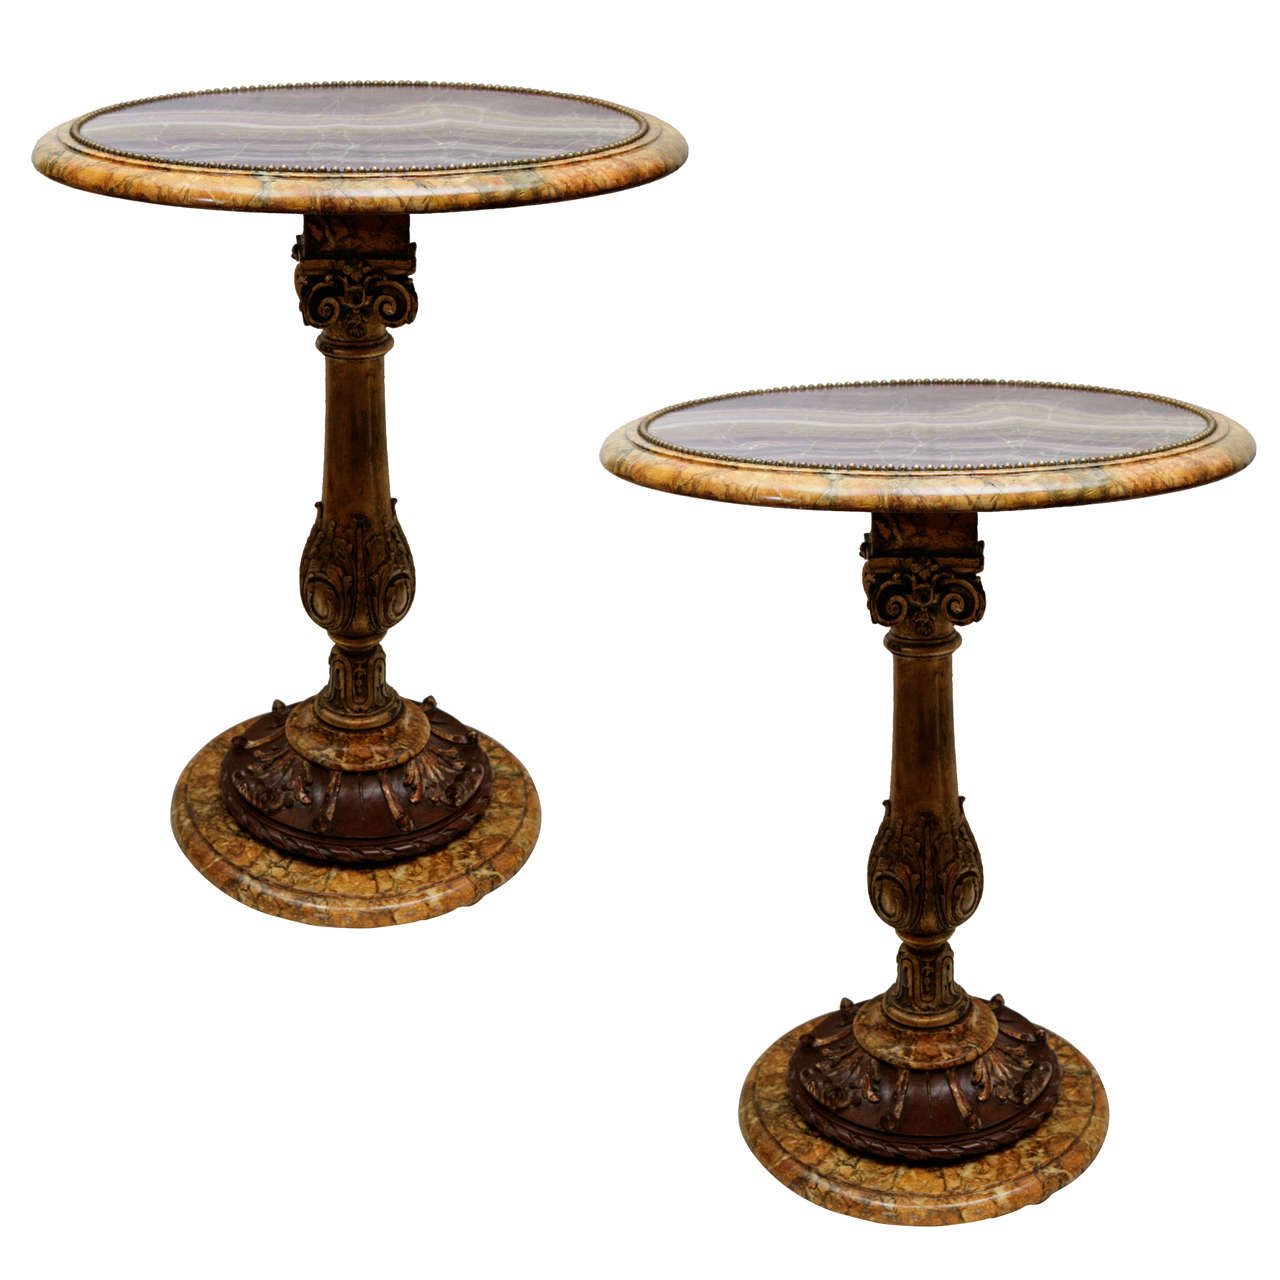 Pair of Early 1900s Italian Carved Giltwood Round Tables For Sale